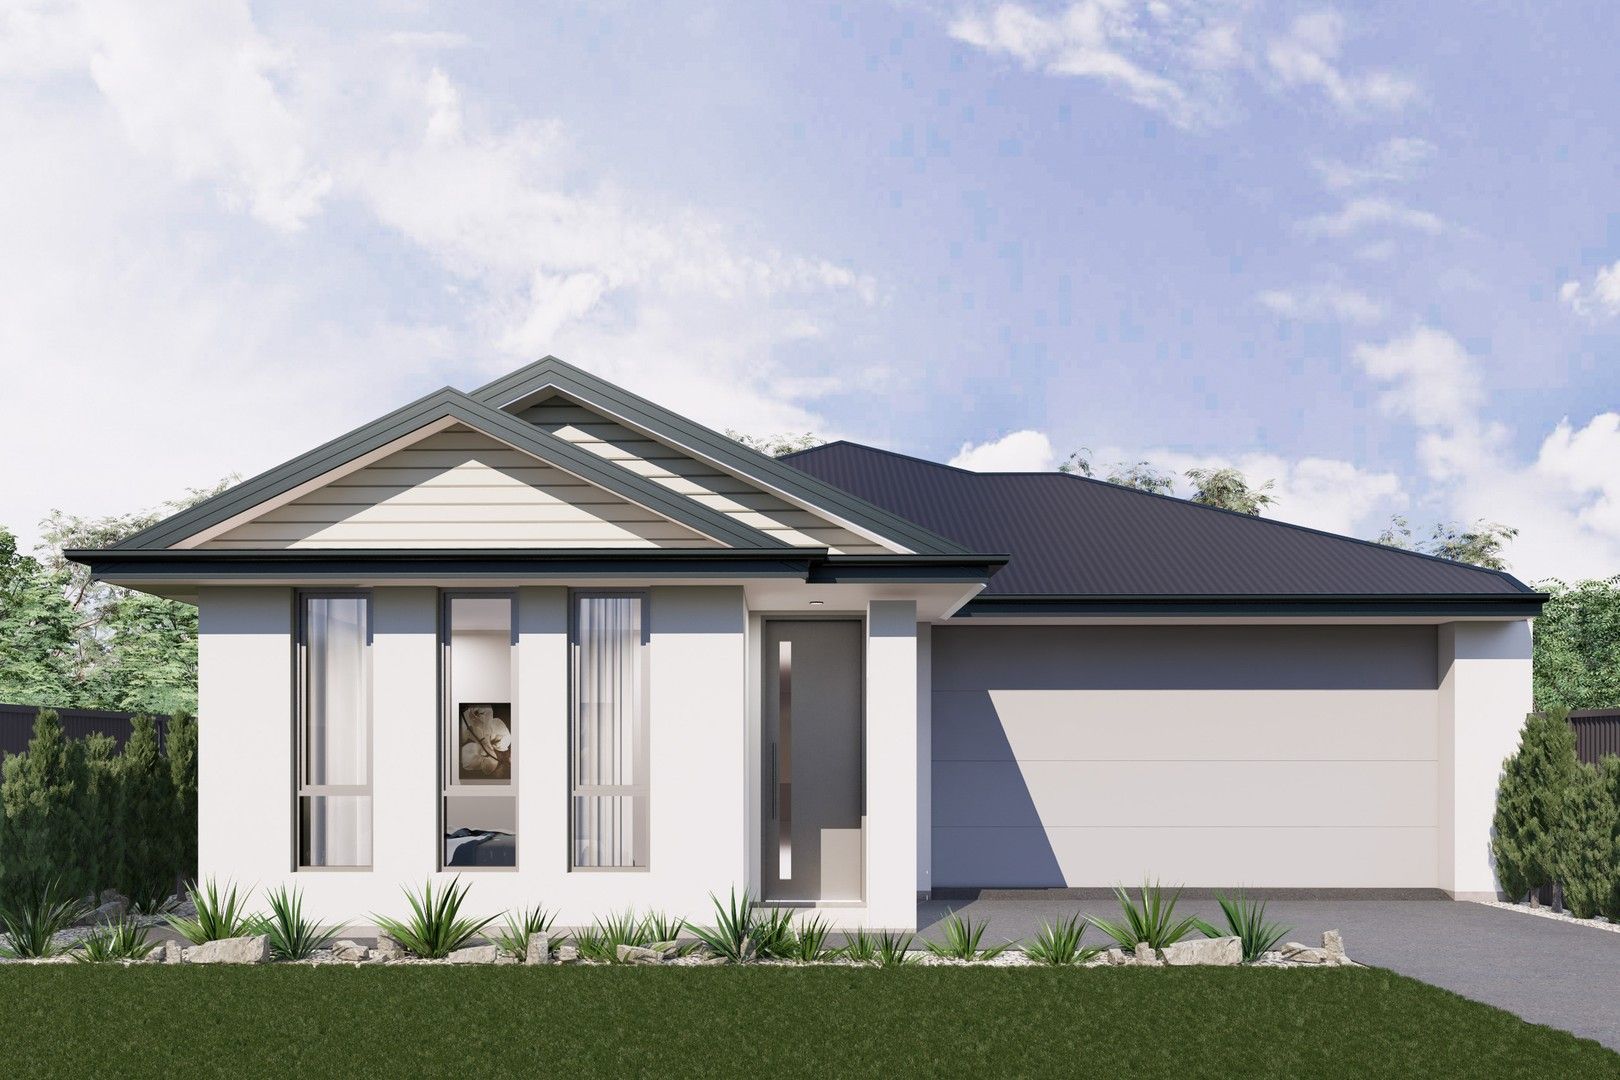 4 bedrooms New House & Land in 18 The Circuit FINDON SA, 5023